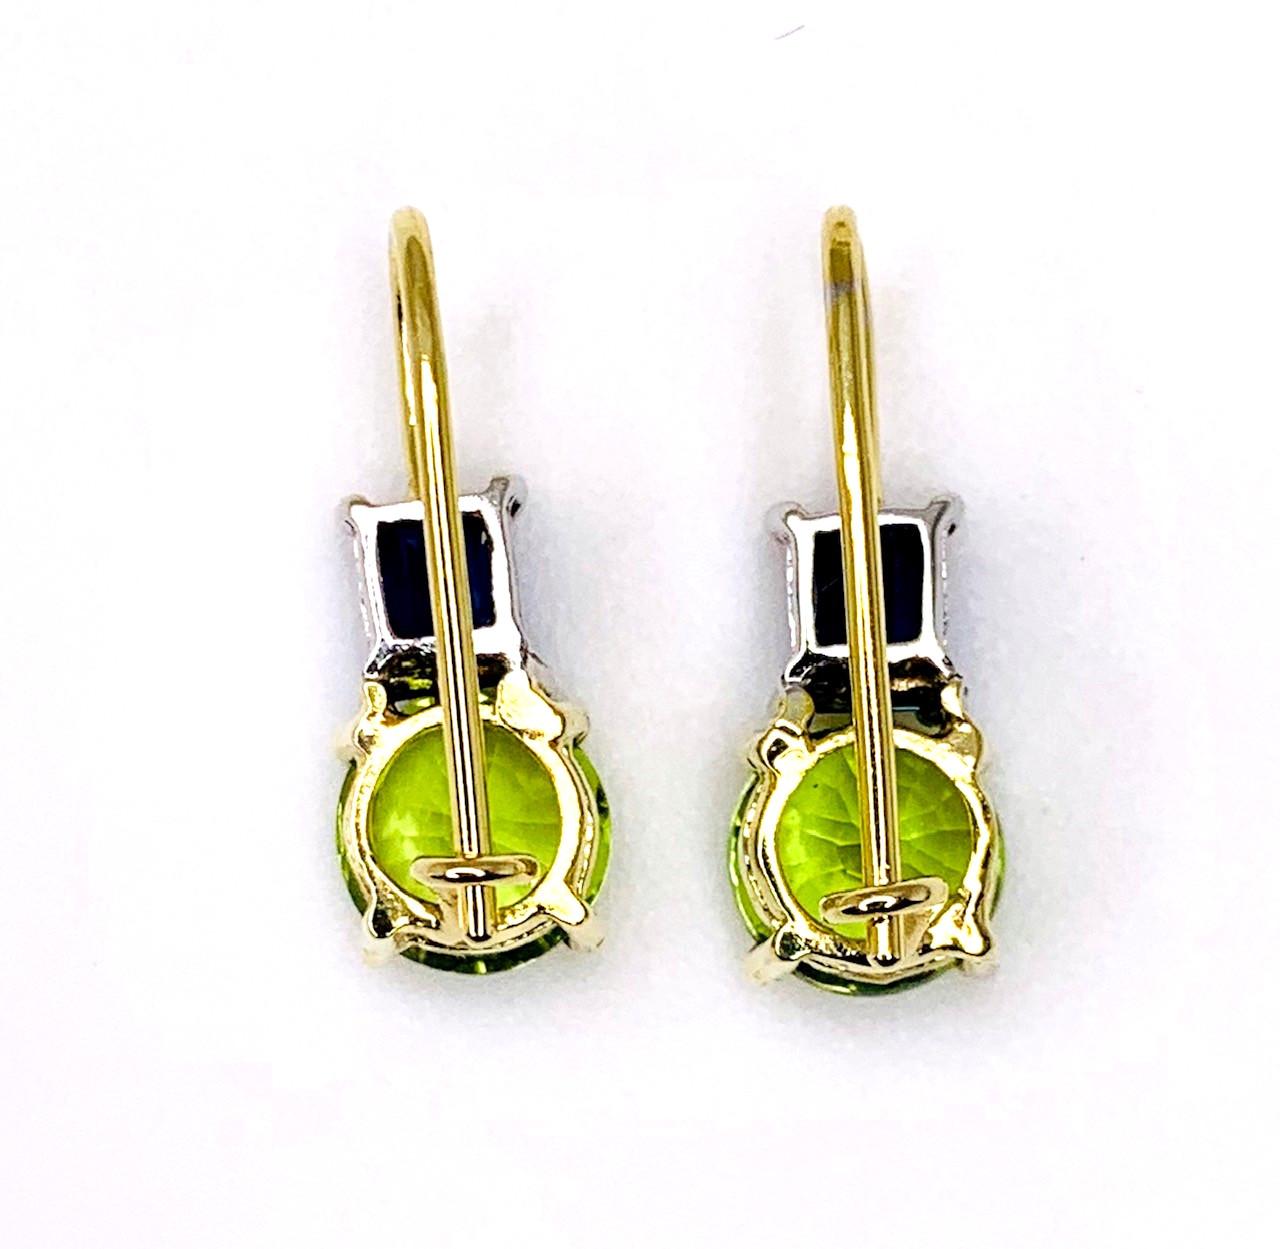 These earrings are a fresh, new look in fine jewelry! The creative use of colors and shapes is clear in the design of these beautiful drop earrings as vibrant, 